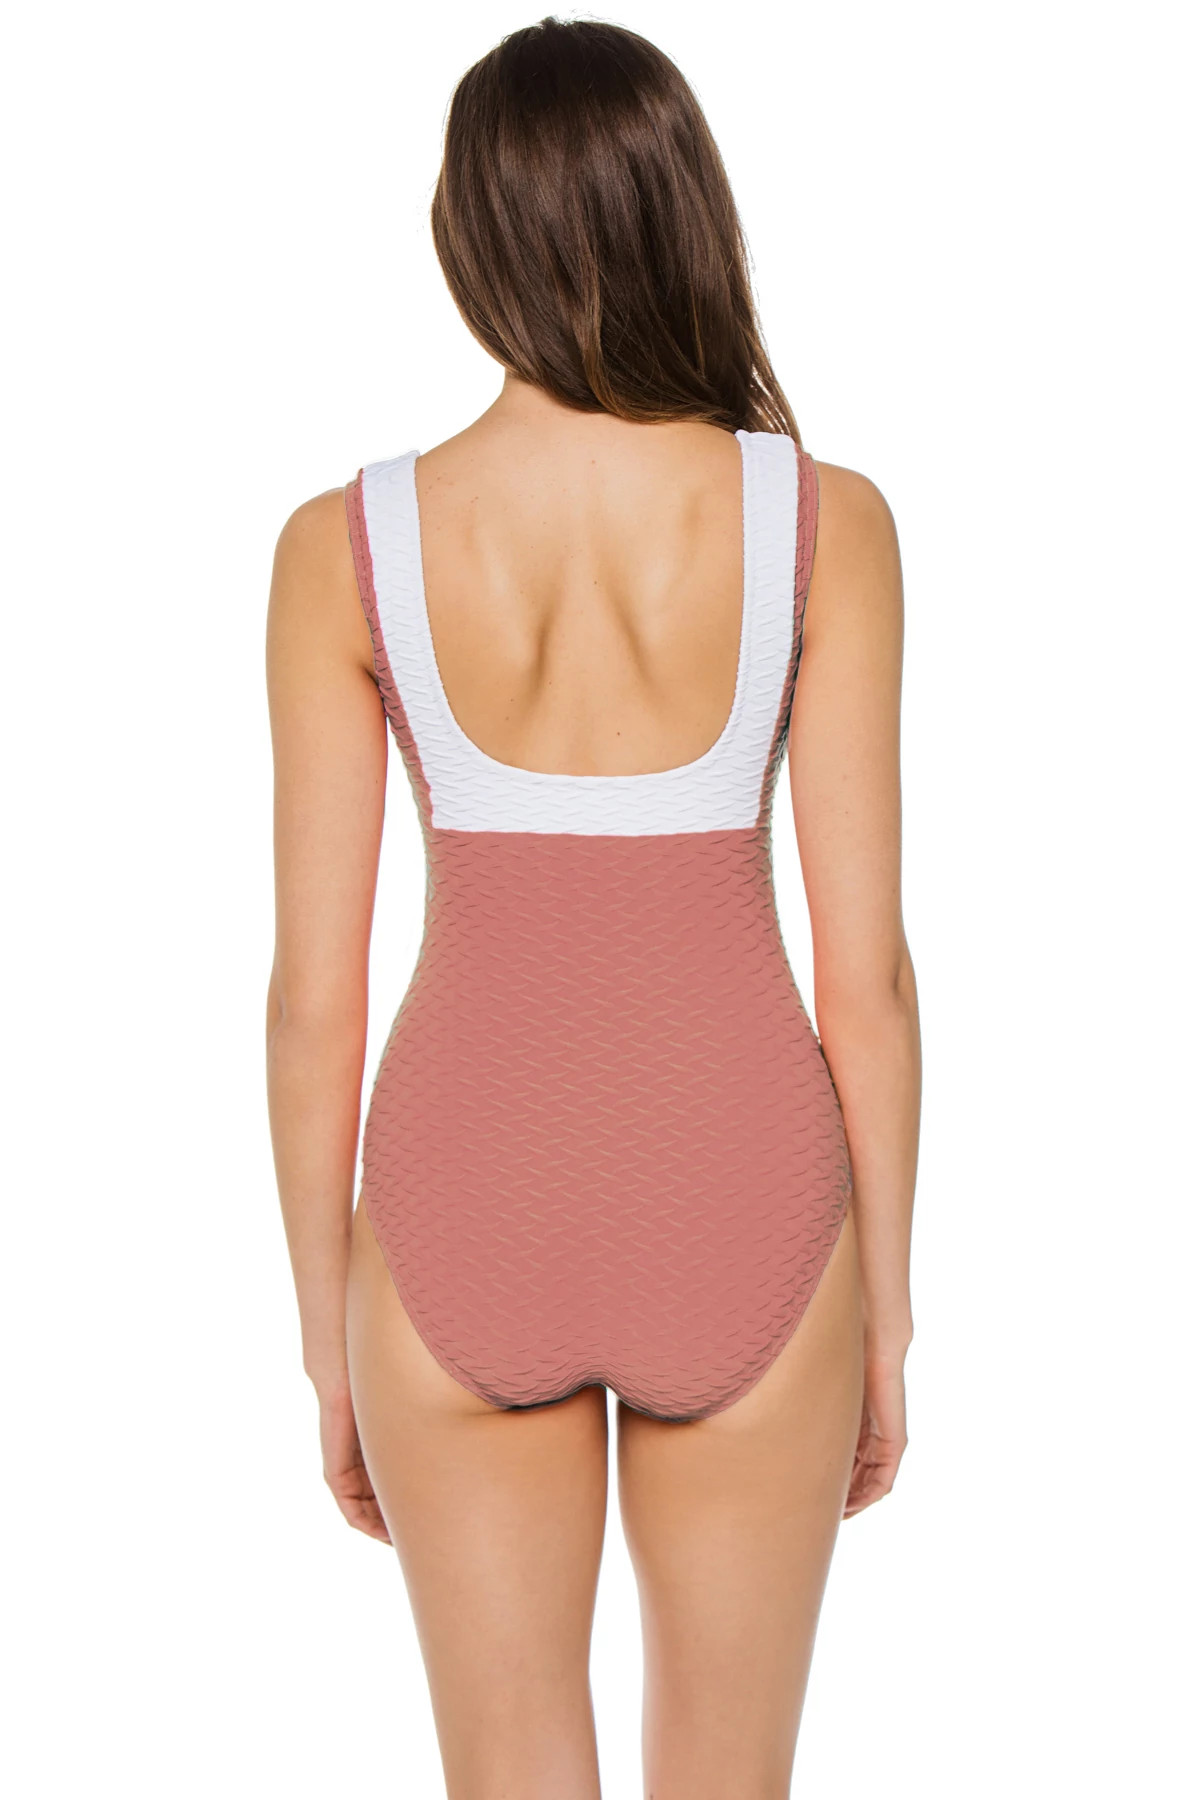 CARAMEL Textured One Piece Swimsuit image number 2